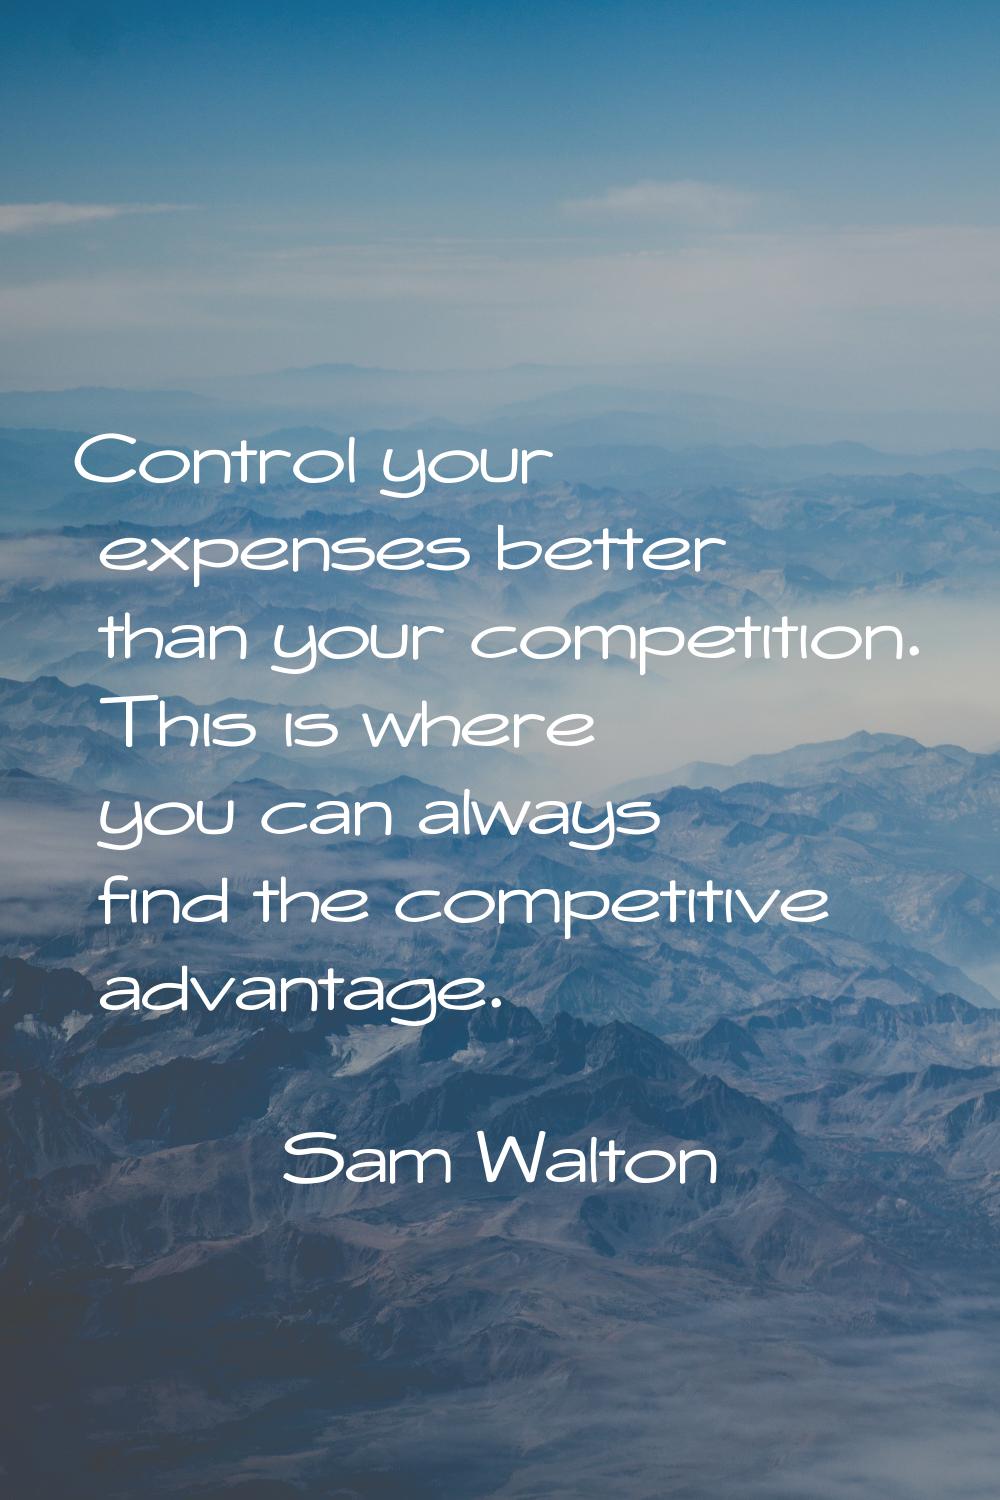 Control your expenses better than your competition. This is where you can always find the competiti